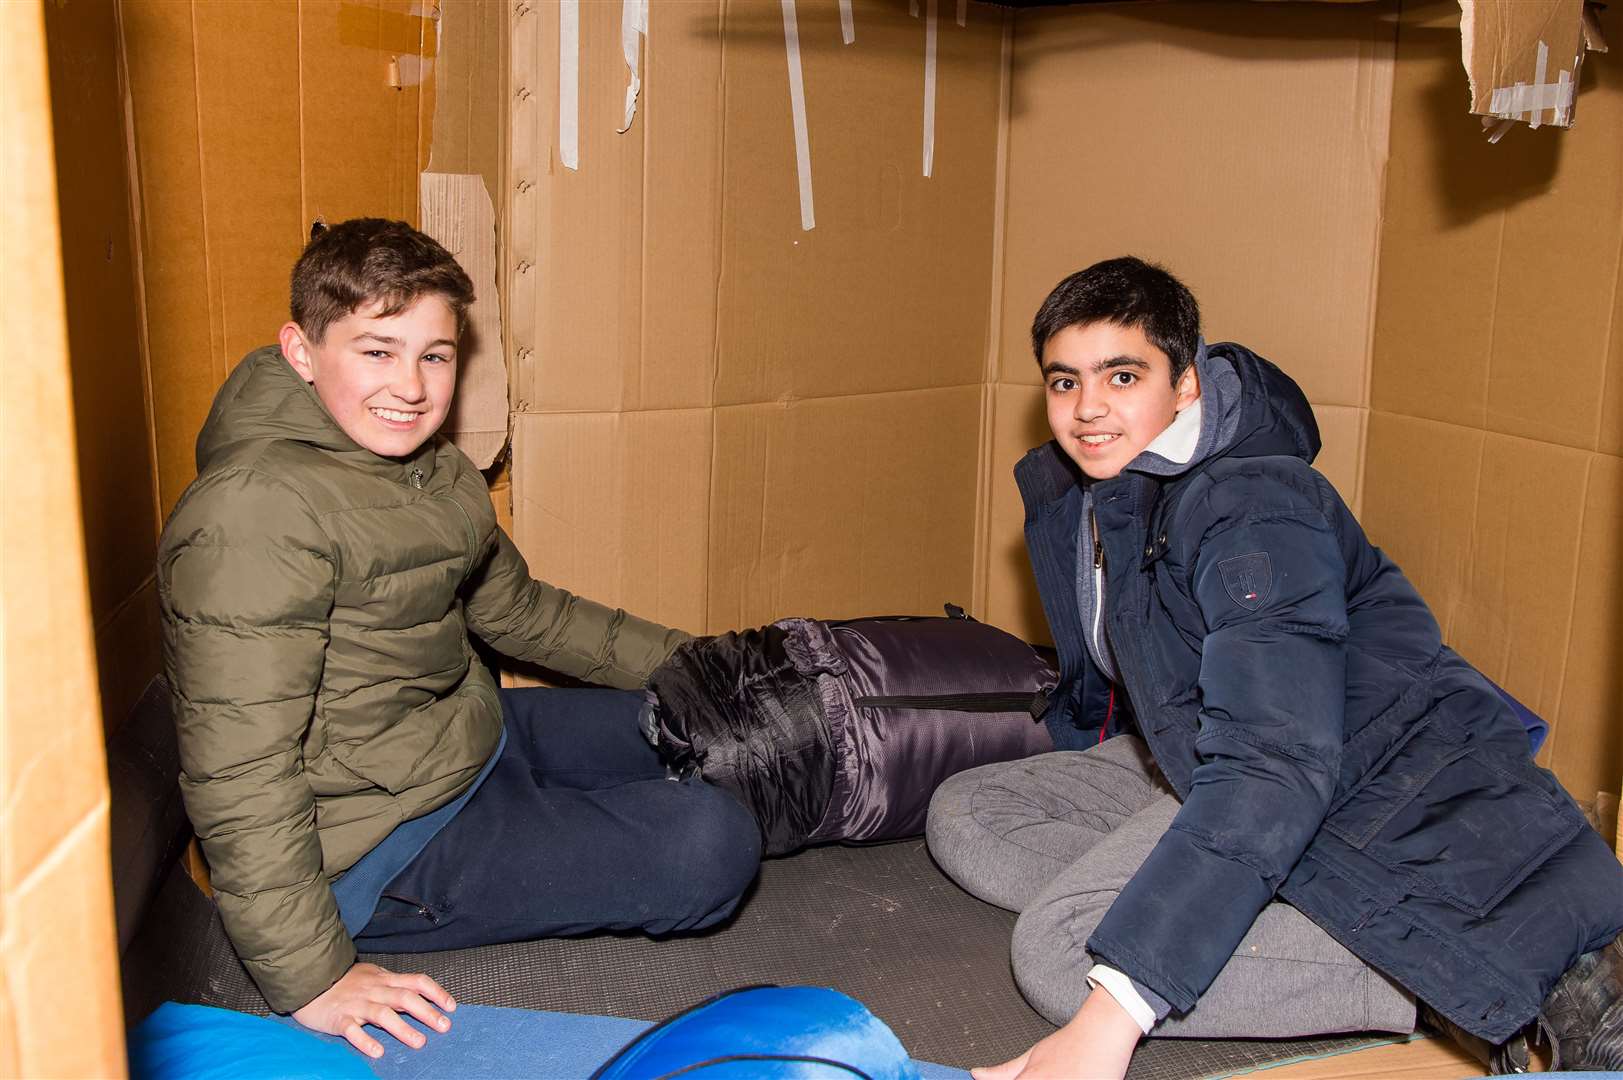 The sleepout took place at the Tonbridge School (9420834)